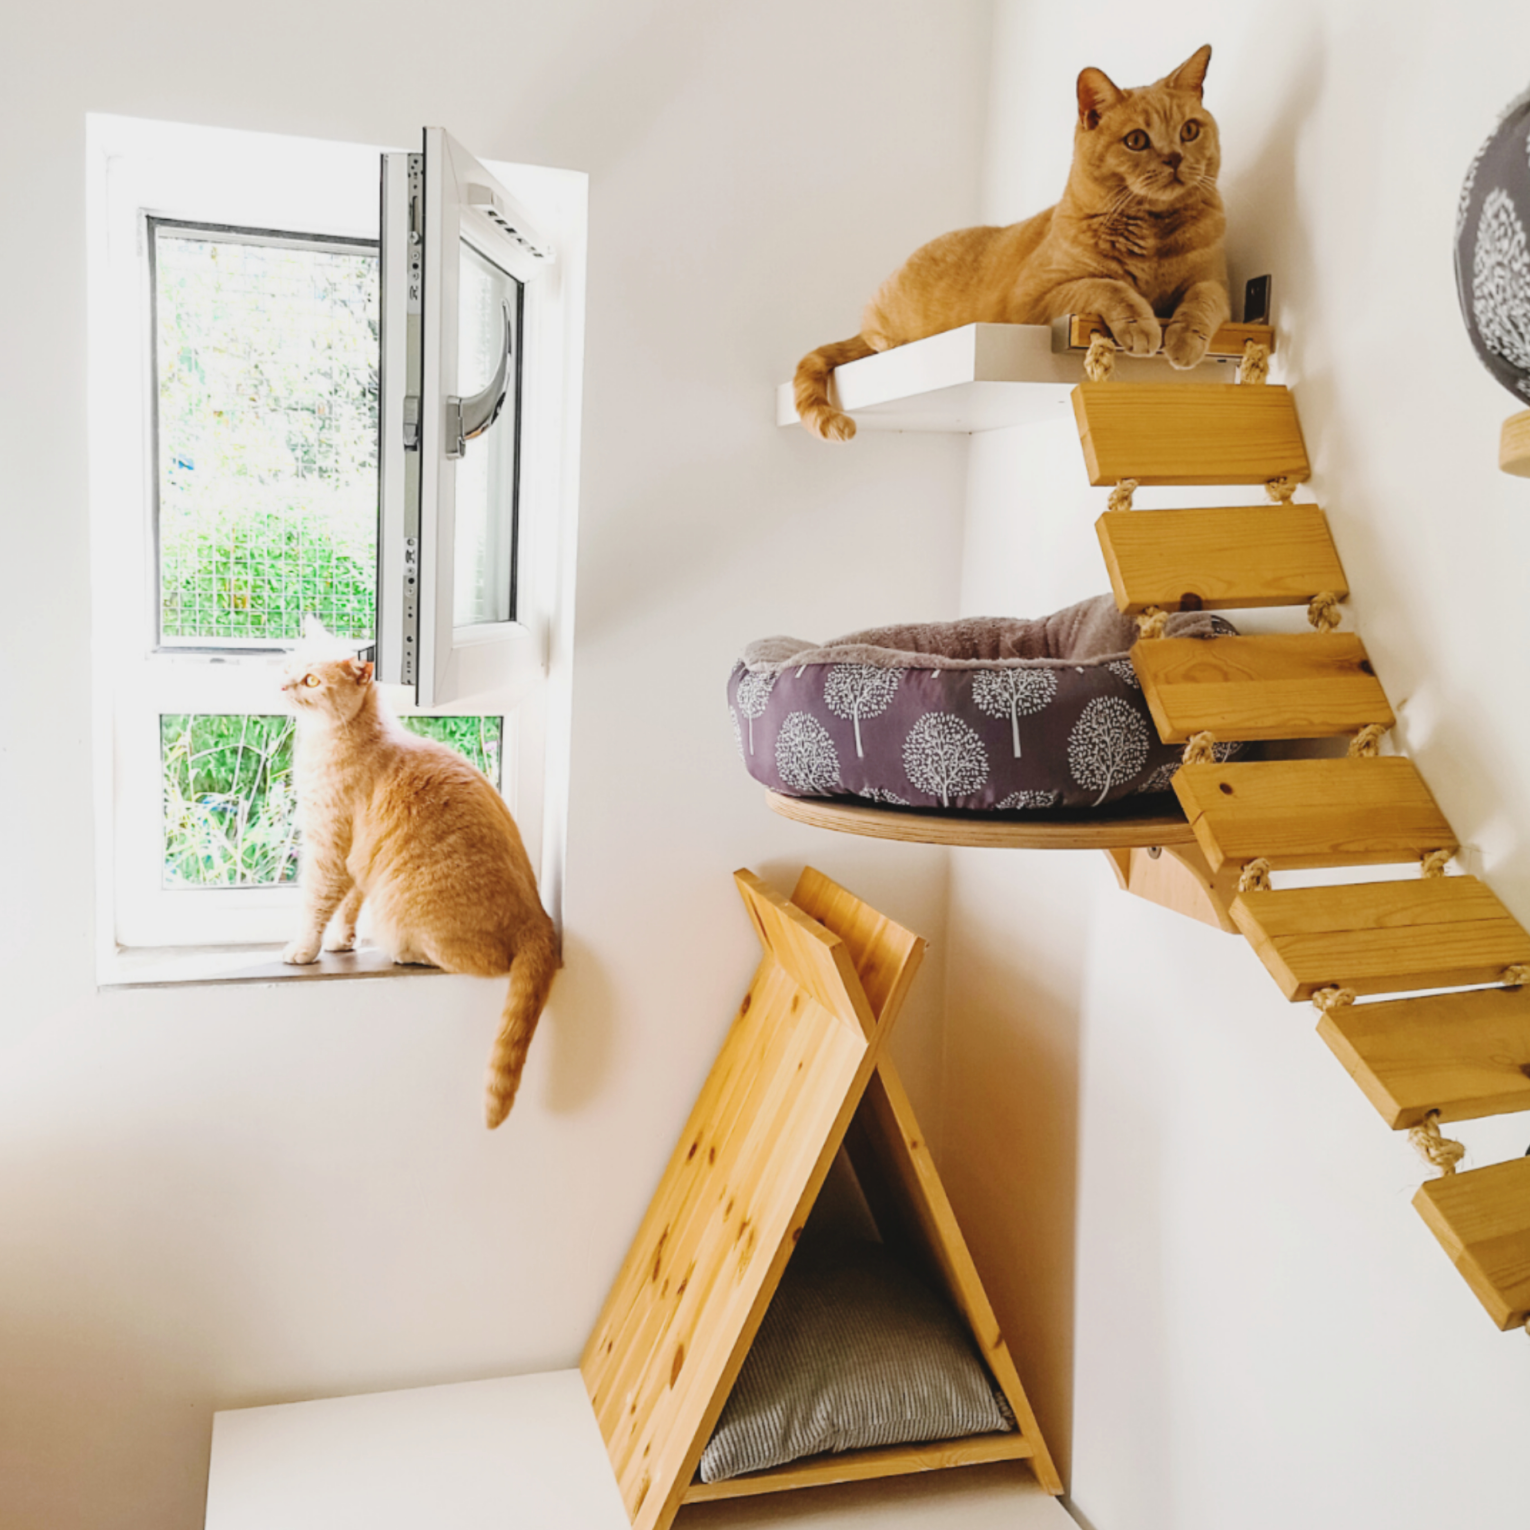 Discover a Feline Paradise at The Great Catsby Hotel